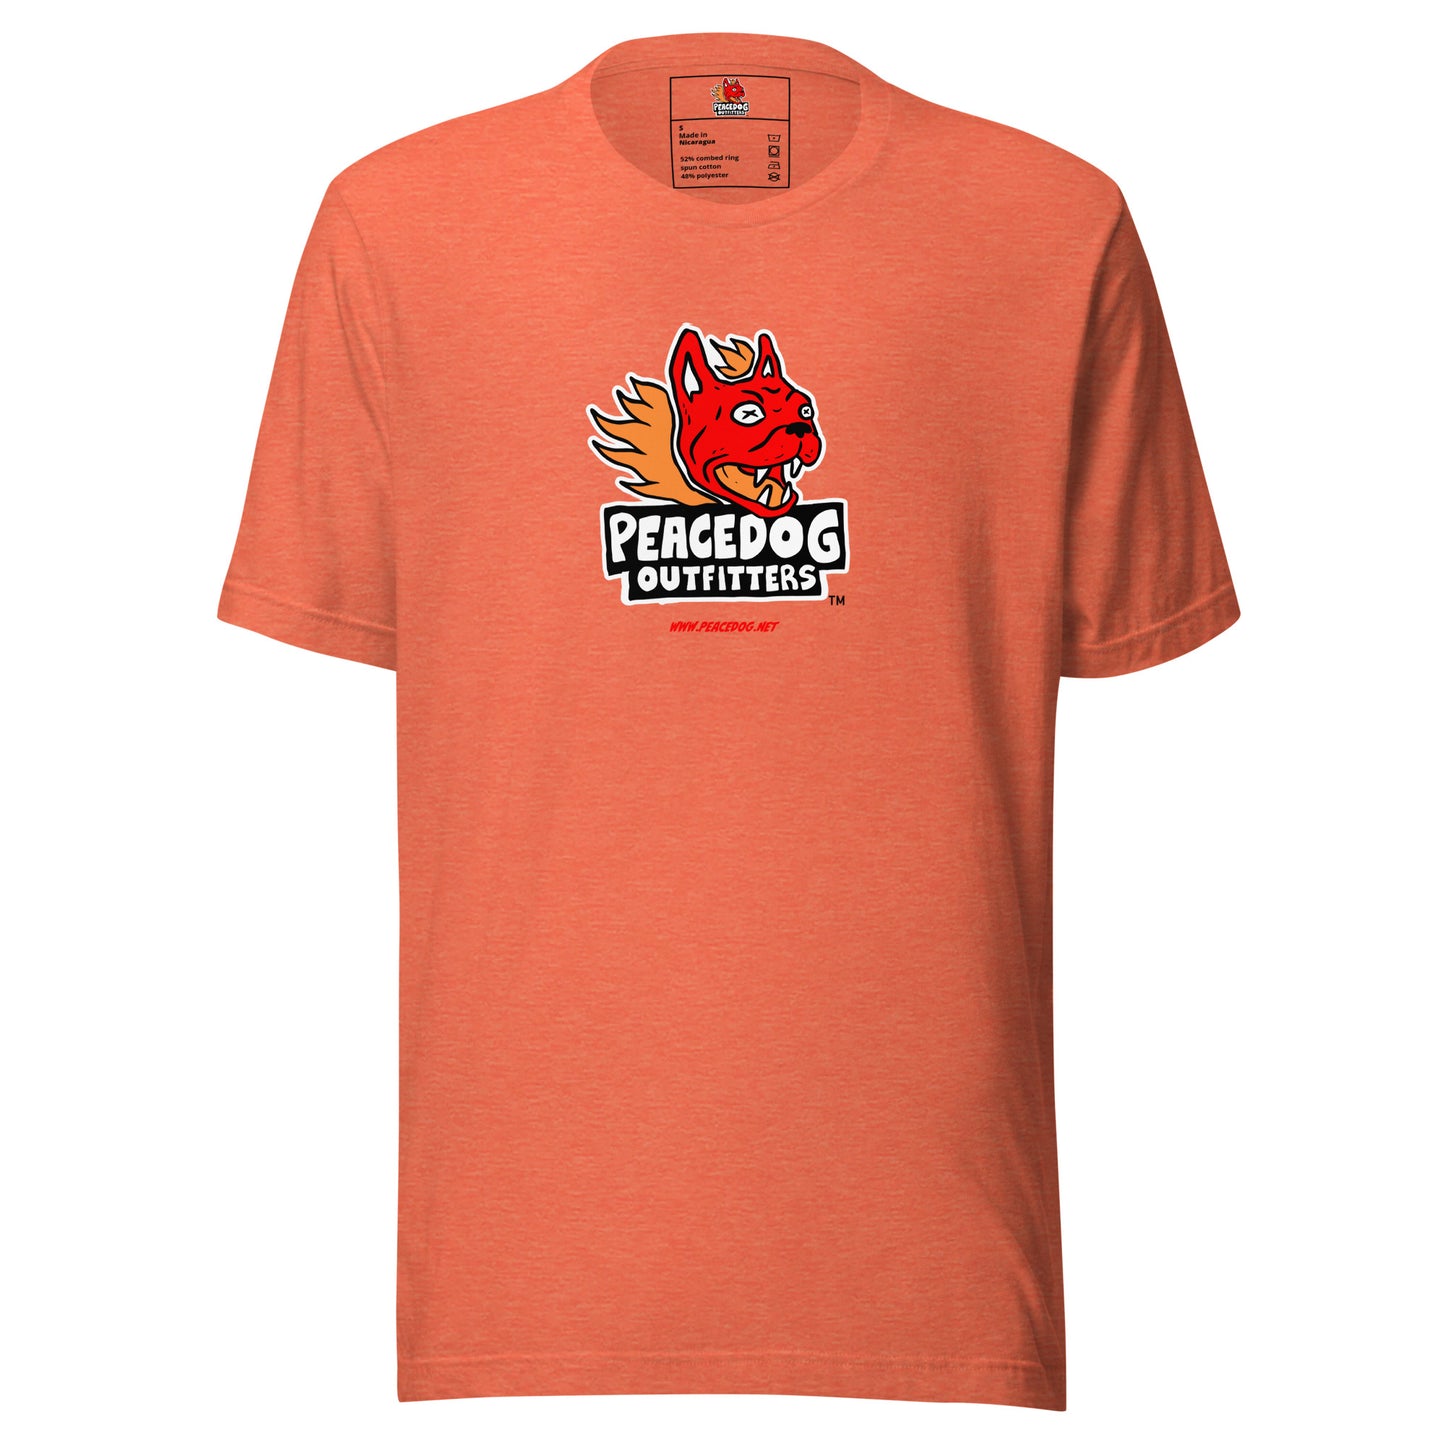 Peacedog Outfitters T-shirt